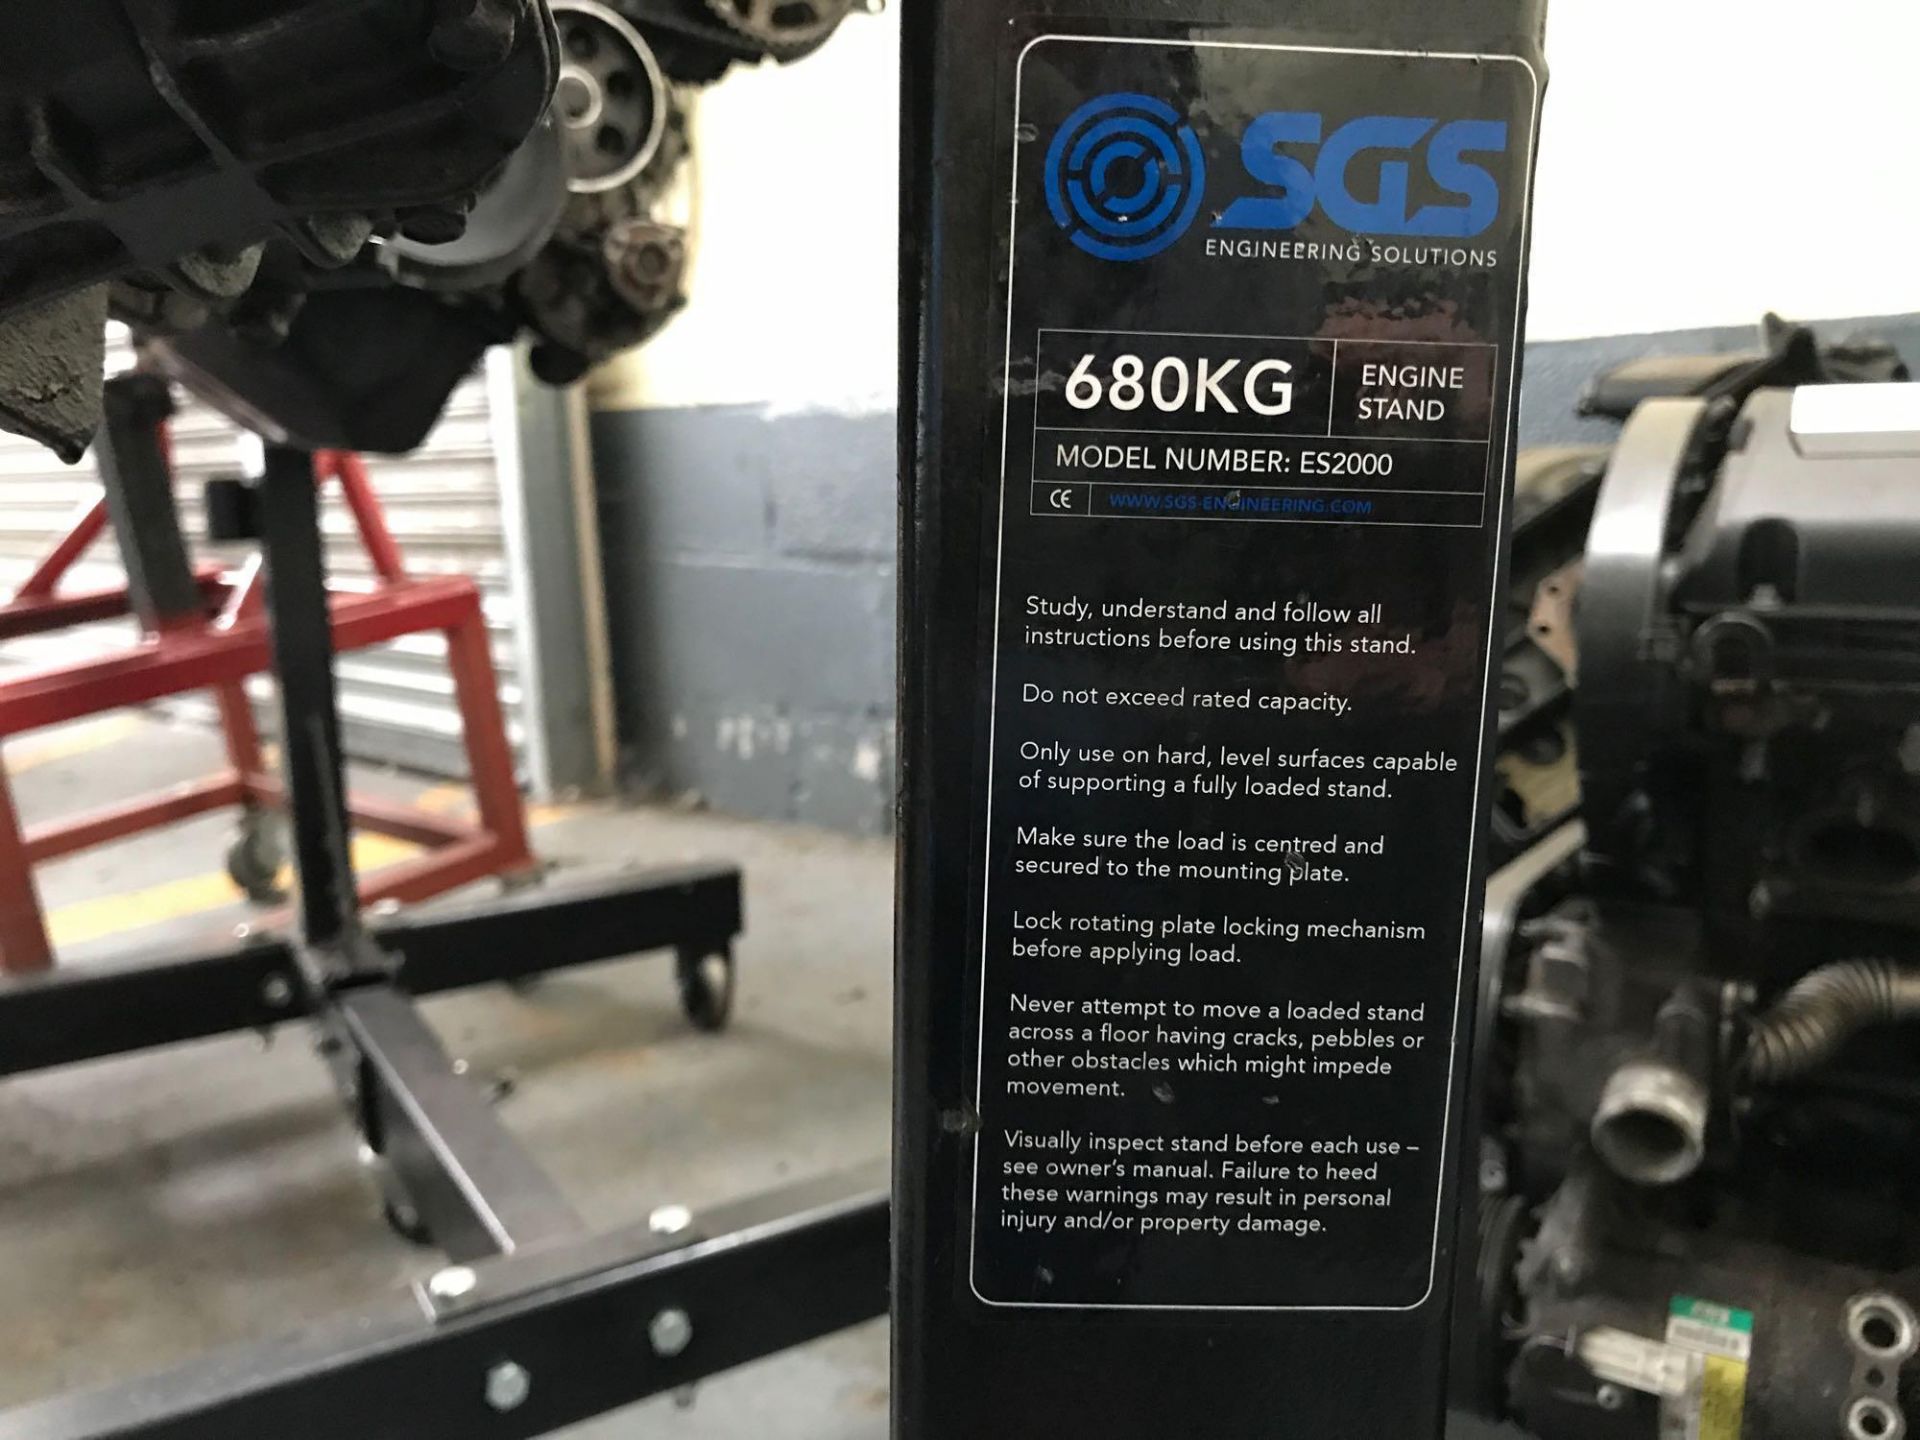 Sgs Engine Stand To Include Engine - Image 3 of 3